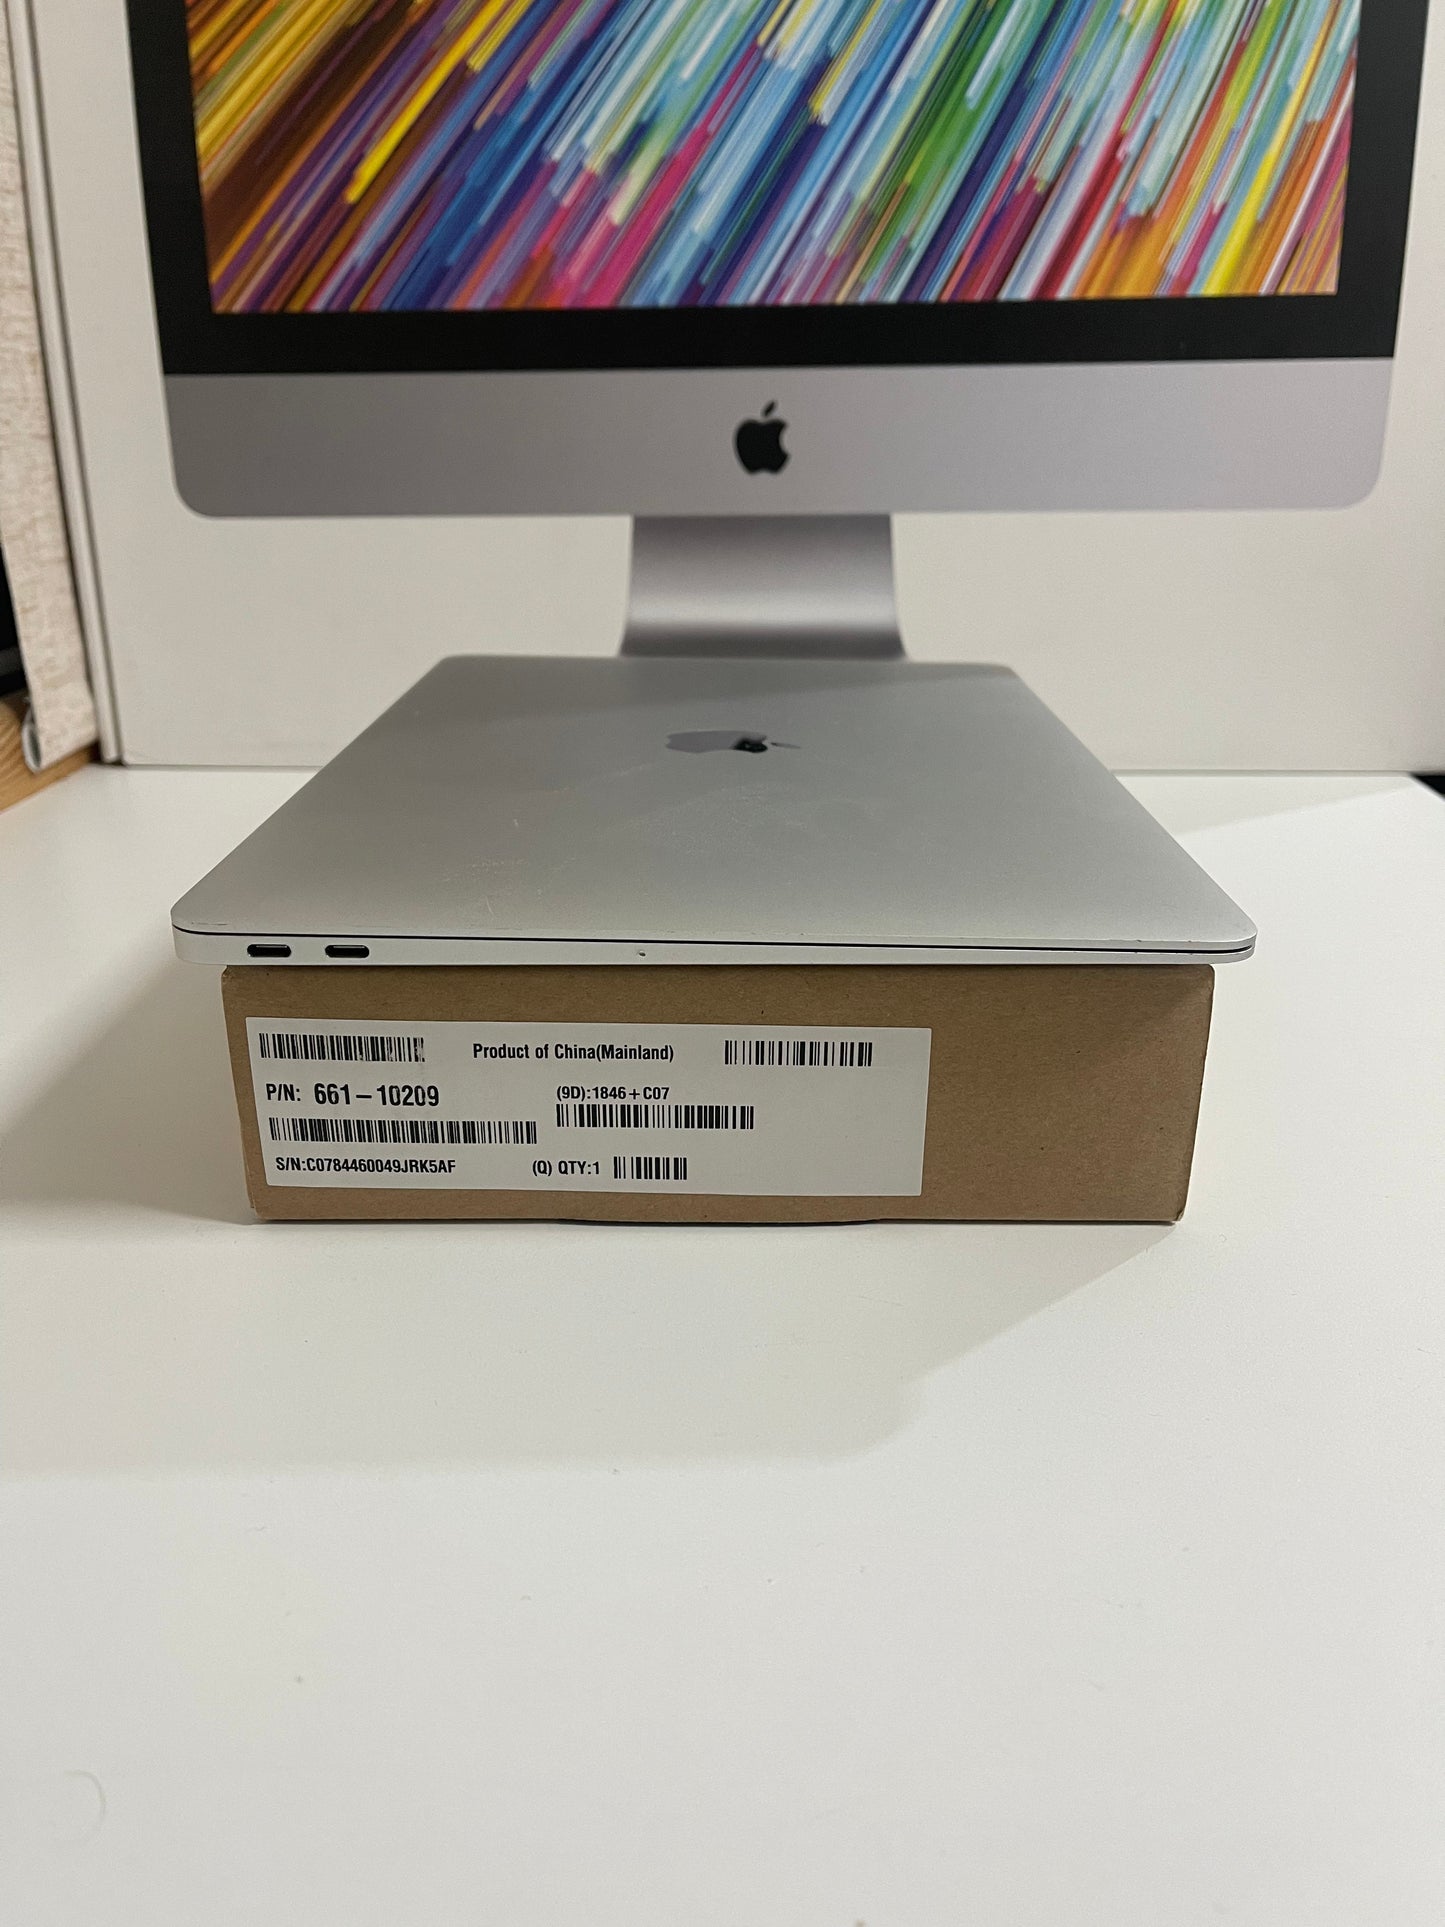 13-inch Macbook Air Retina ~ (2019, Core i5 1.6GHz up to 3.6GHz, 16GB, 512GB SSD)